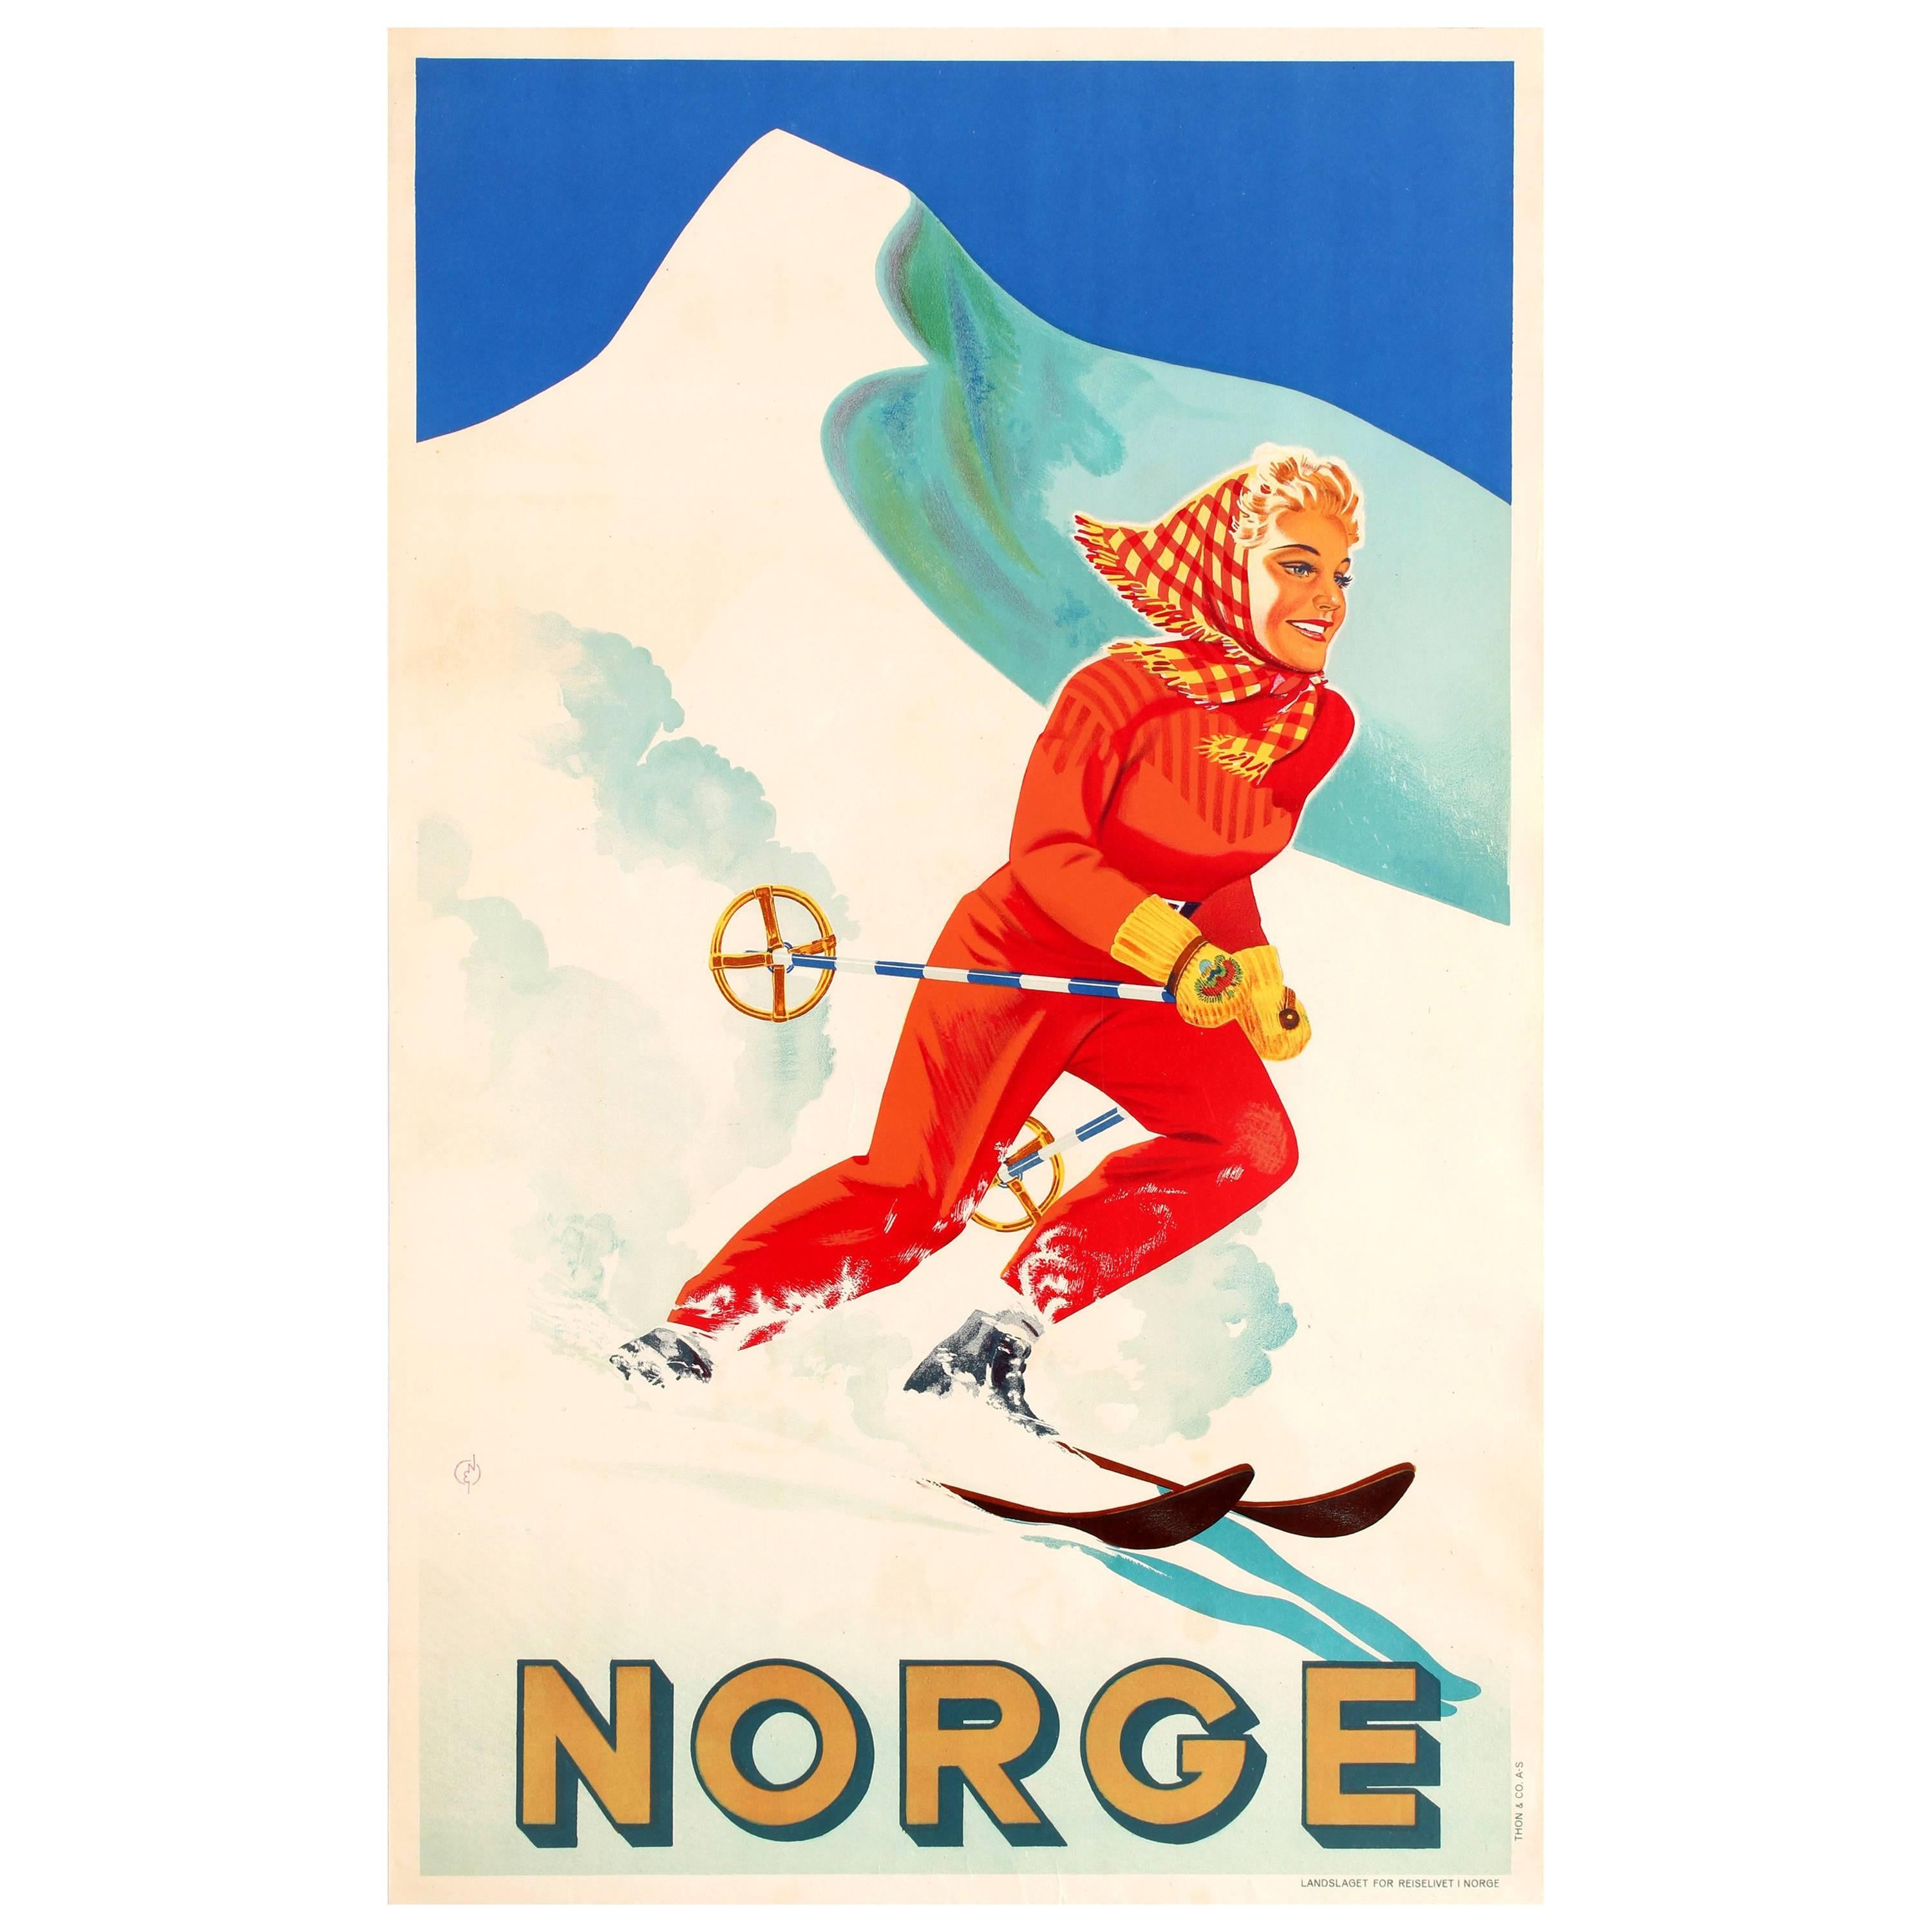 Original Vintage Winter Sports Travel Poster Promoting Skiing In Norway - Norge